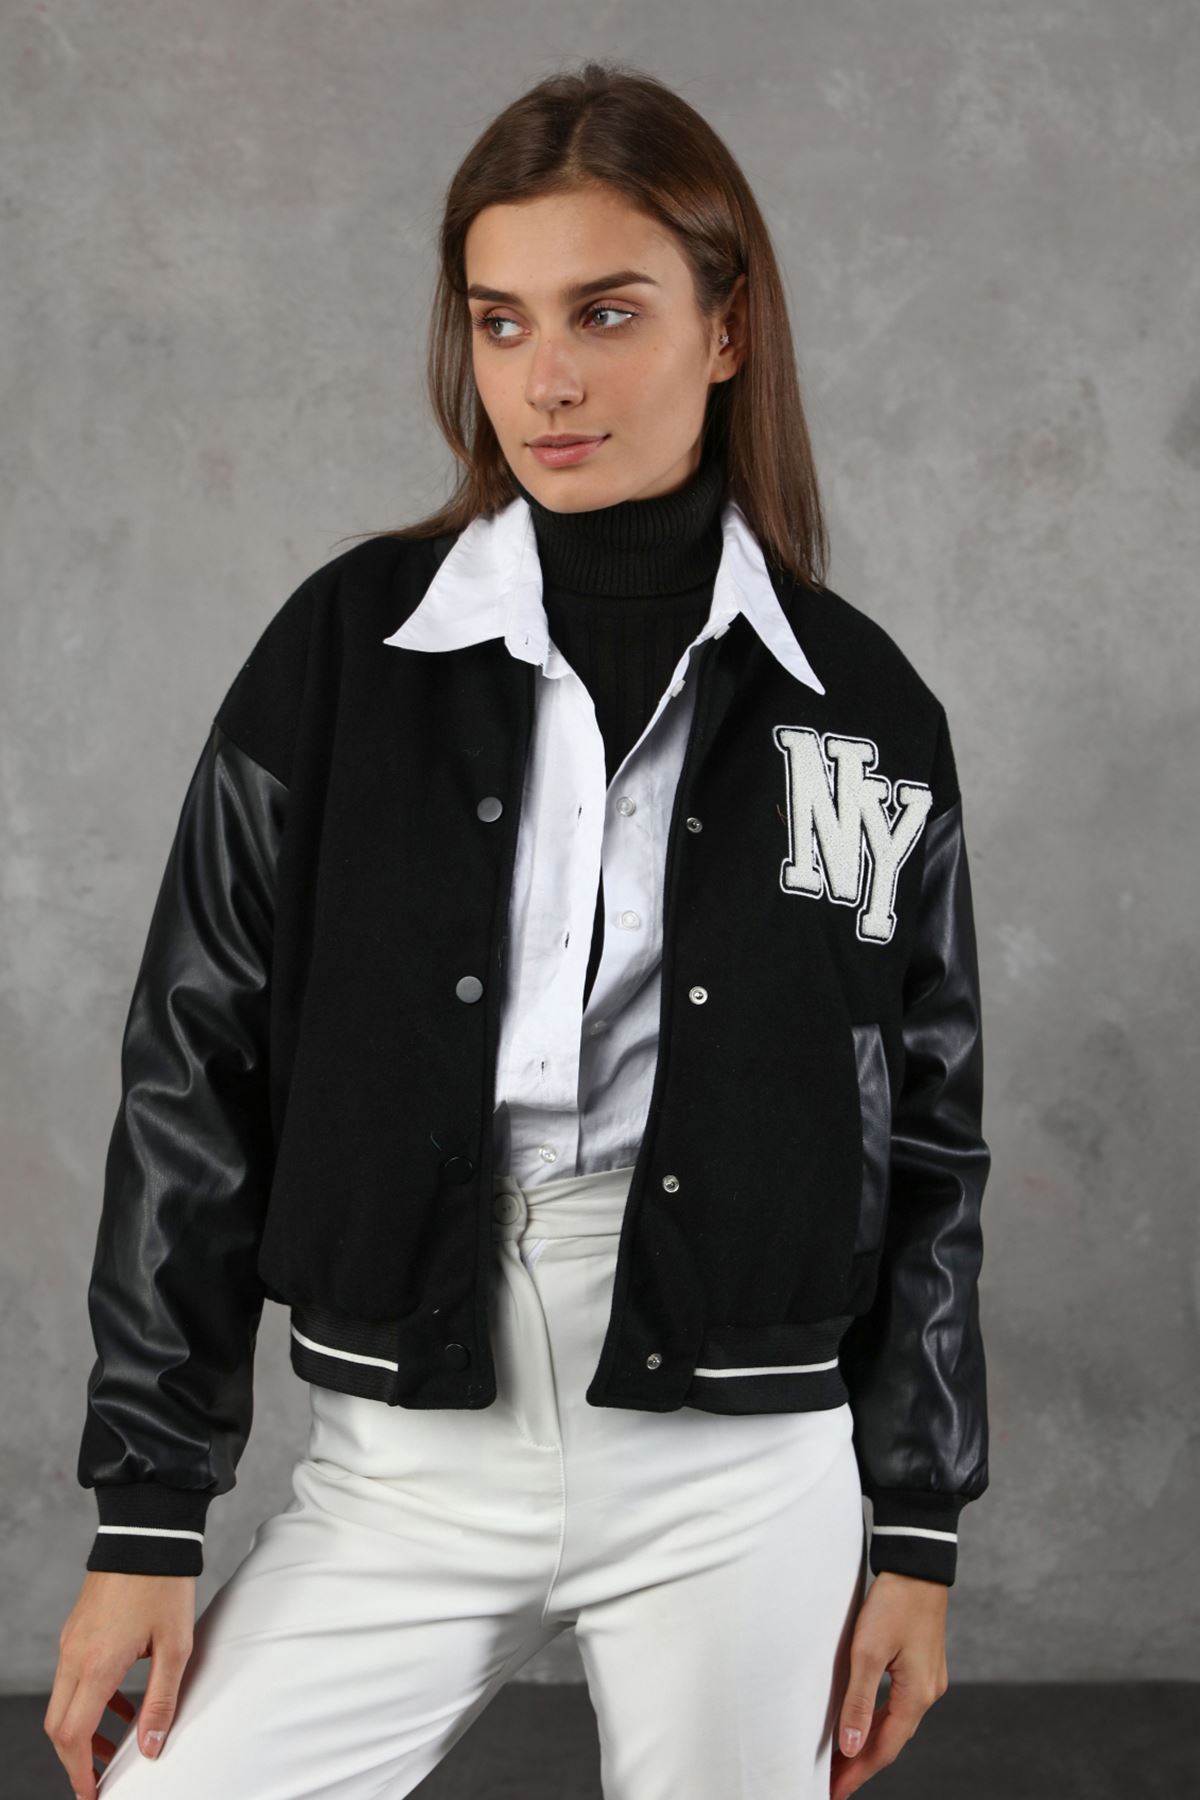 Women's College Coat with Leather Sleeves